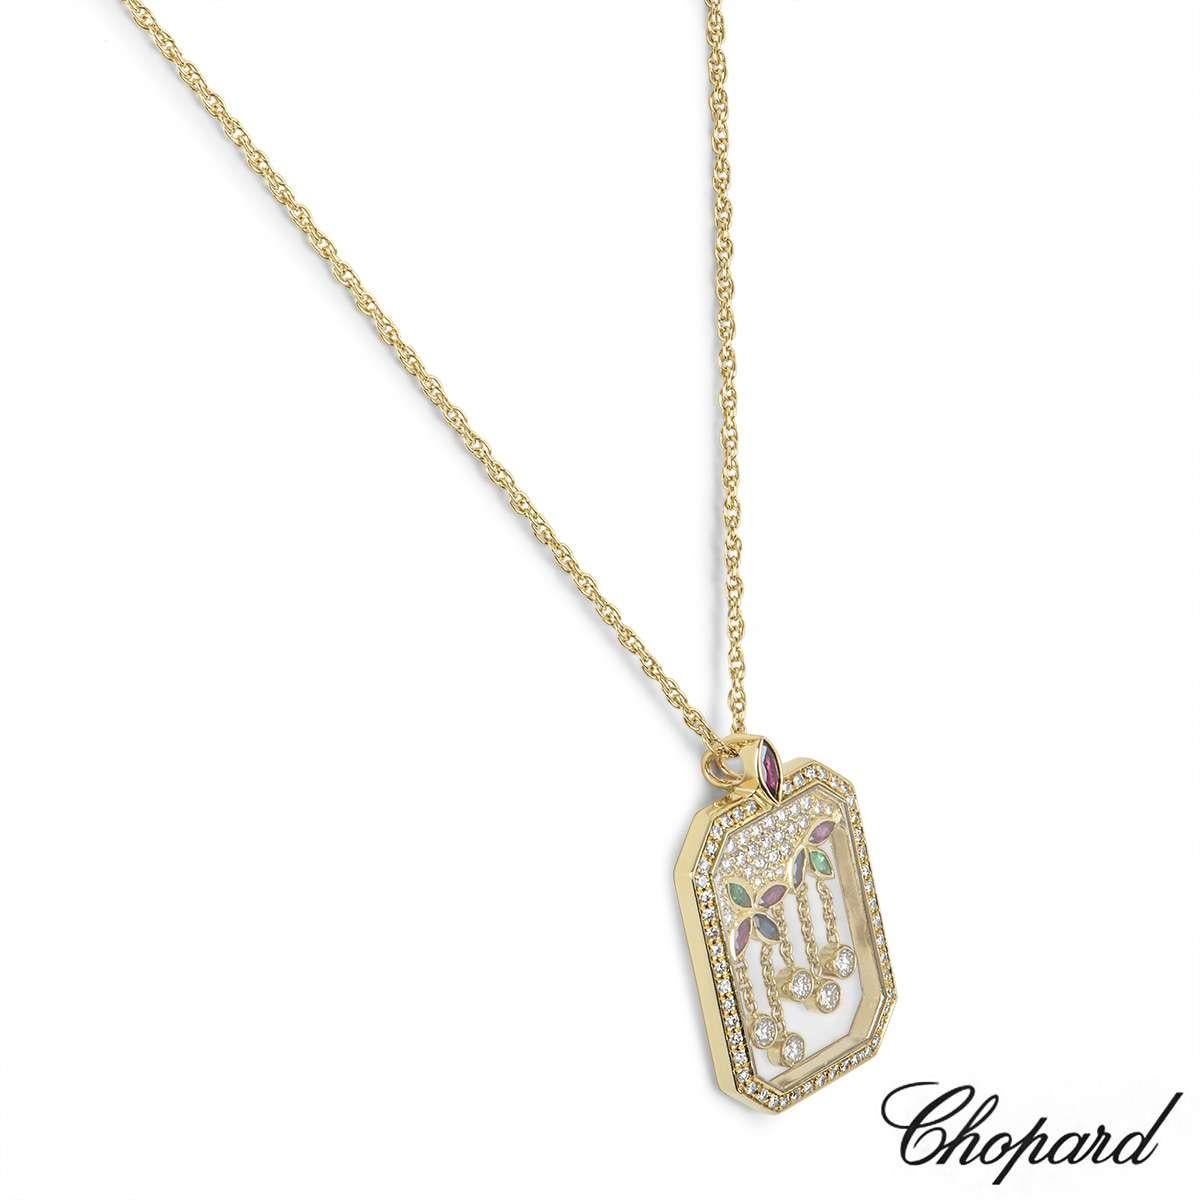 An elegant 18k yellow gold pendant by Chopard. The pendant features a rectangular glass motif encasing a floral design floating in the centre. The motif is set with diamonds, sapphires, rubies and emeralds. The pendant comes on an 18 inch chain